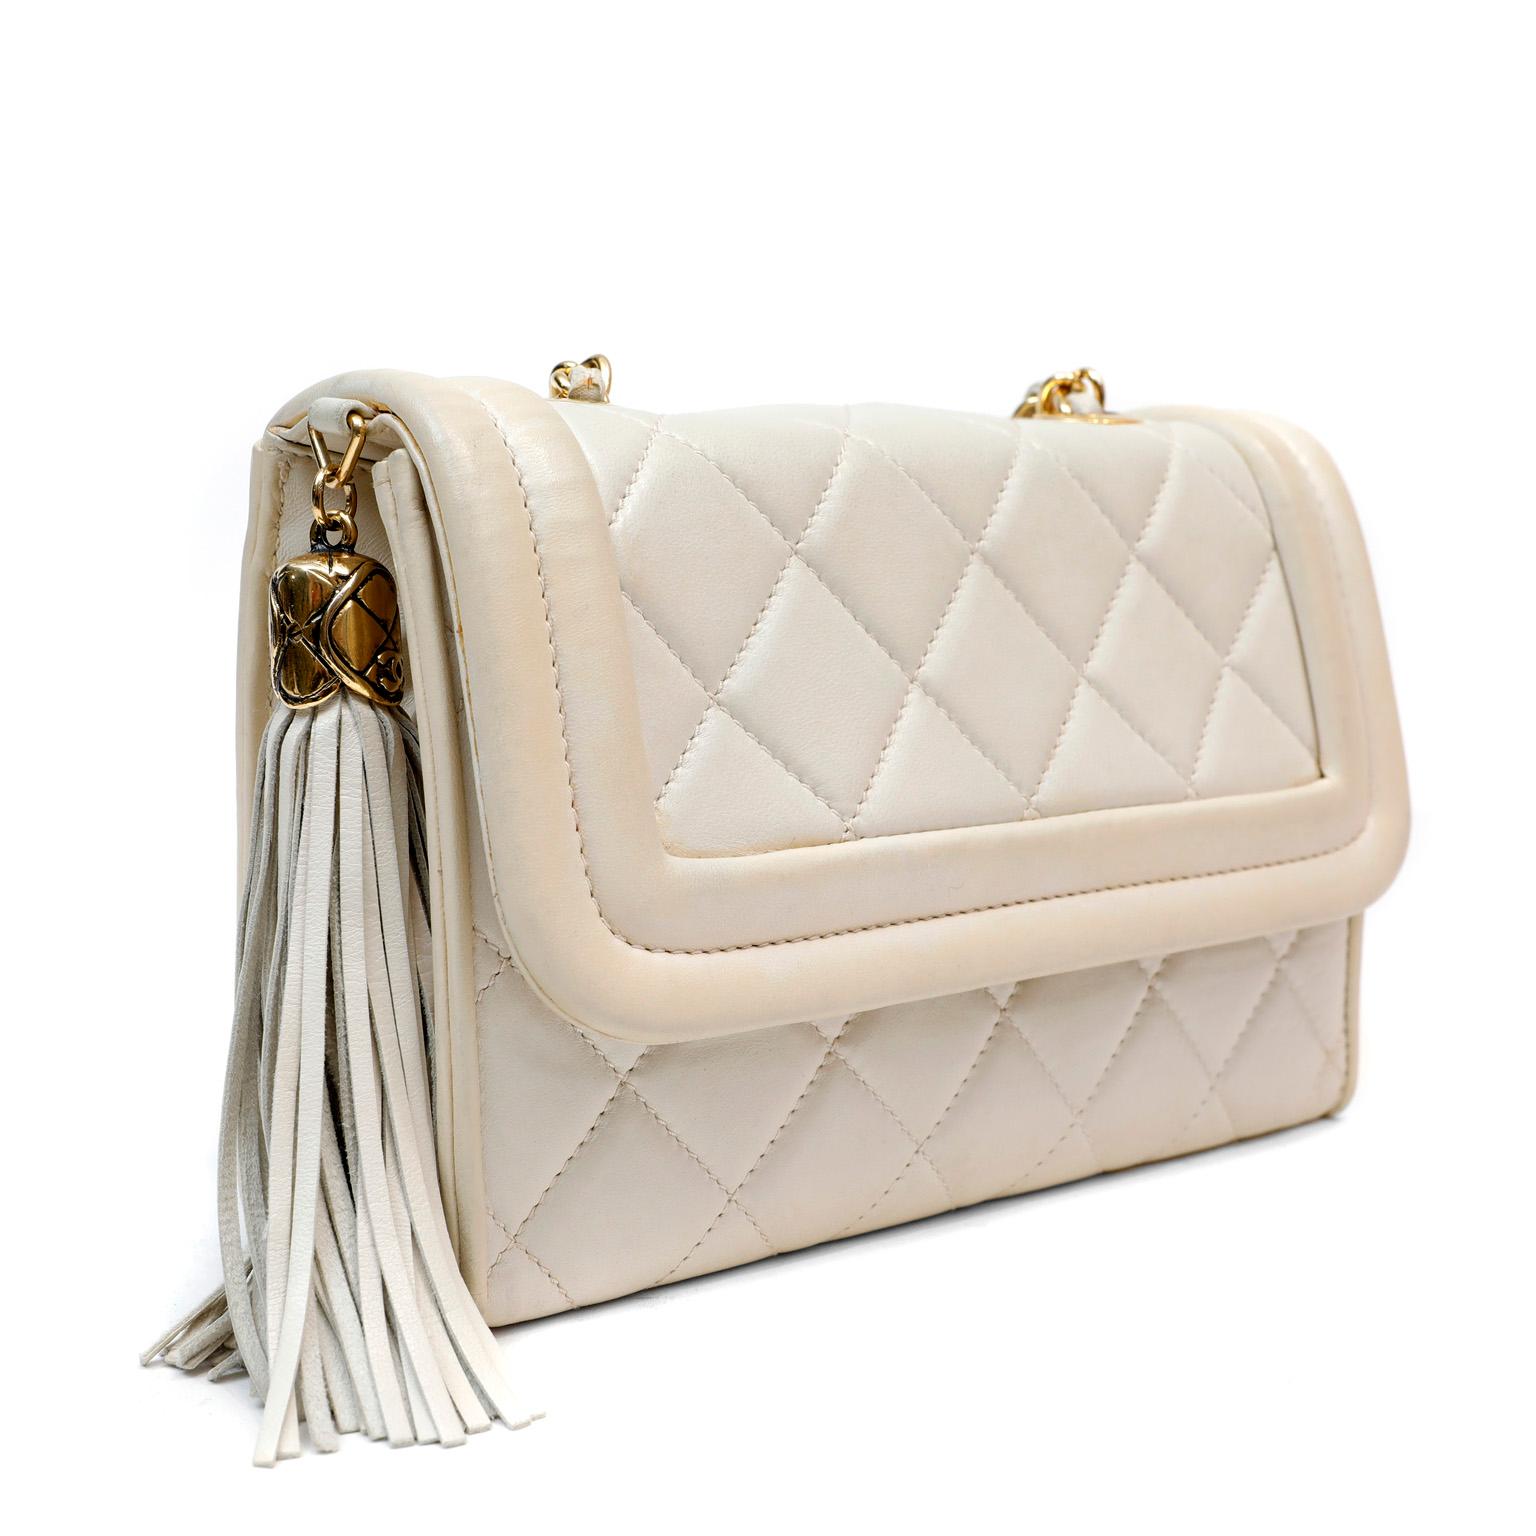 This authentic Chanel Ivory Quilted Lambskin Vintage Flap Bag is in good previously owned condition.  Late 80’s- early 90’s collectible.  Ivory lambskin is quilted in signature Chanel diamond pattern.  Reinforced welted edge frames the front flap. 